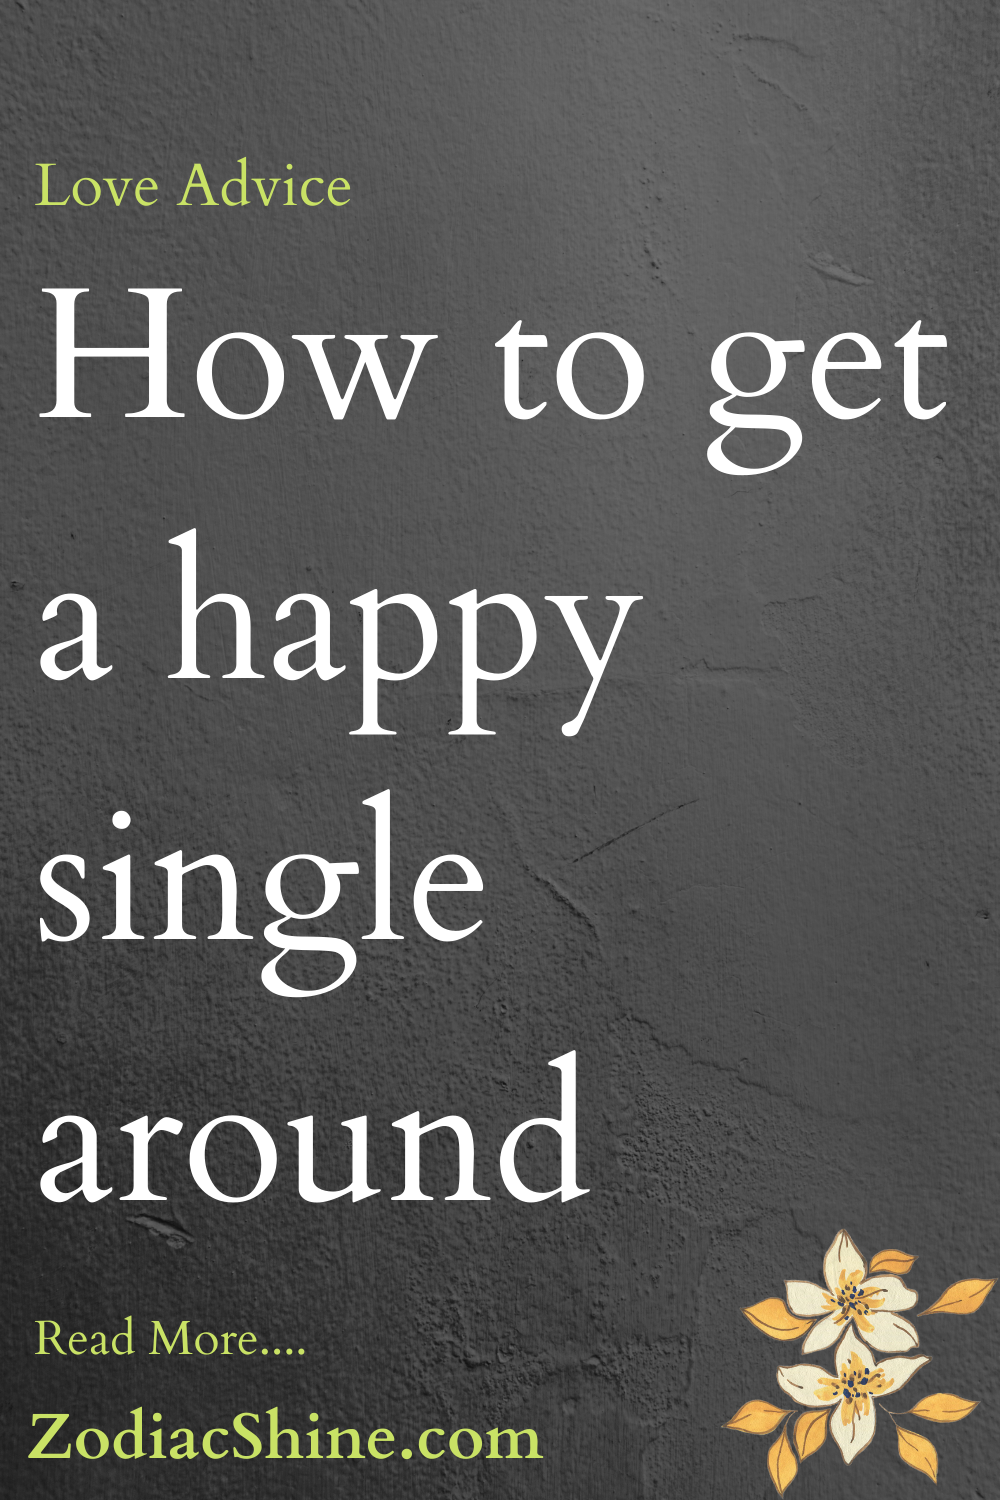 How to get a happy single around